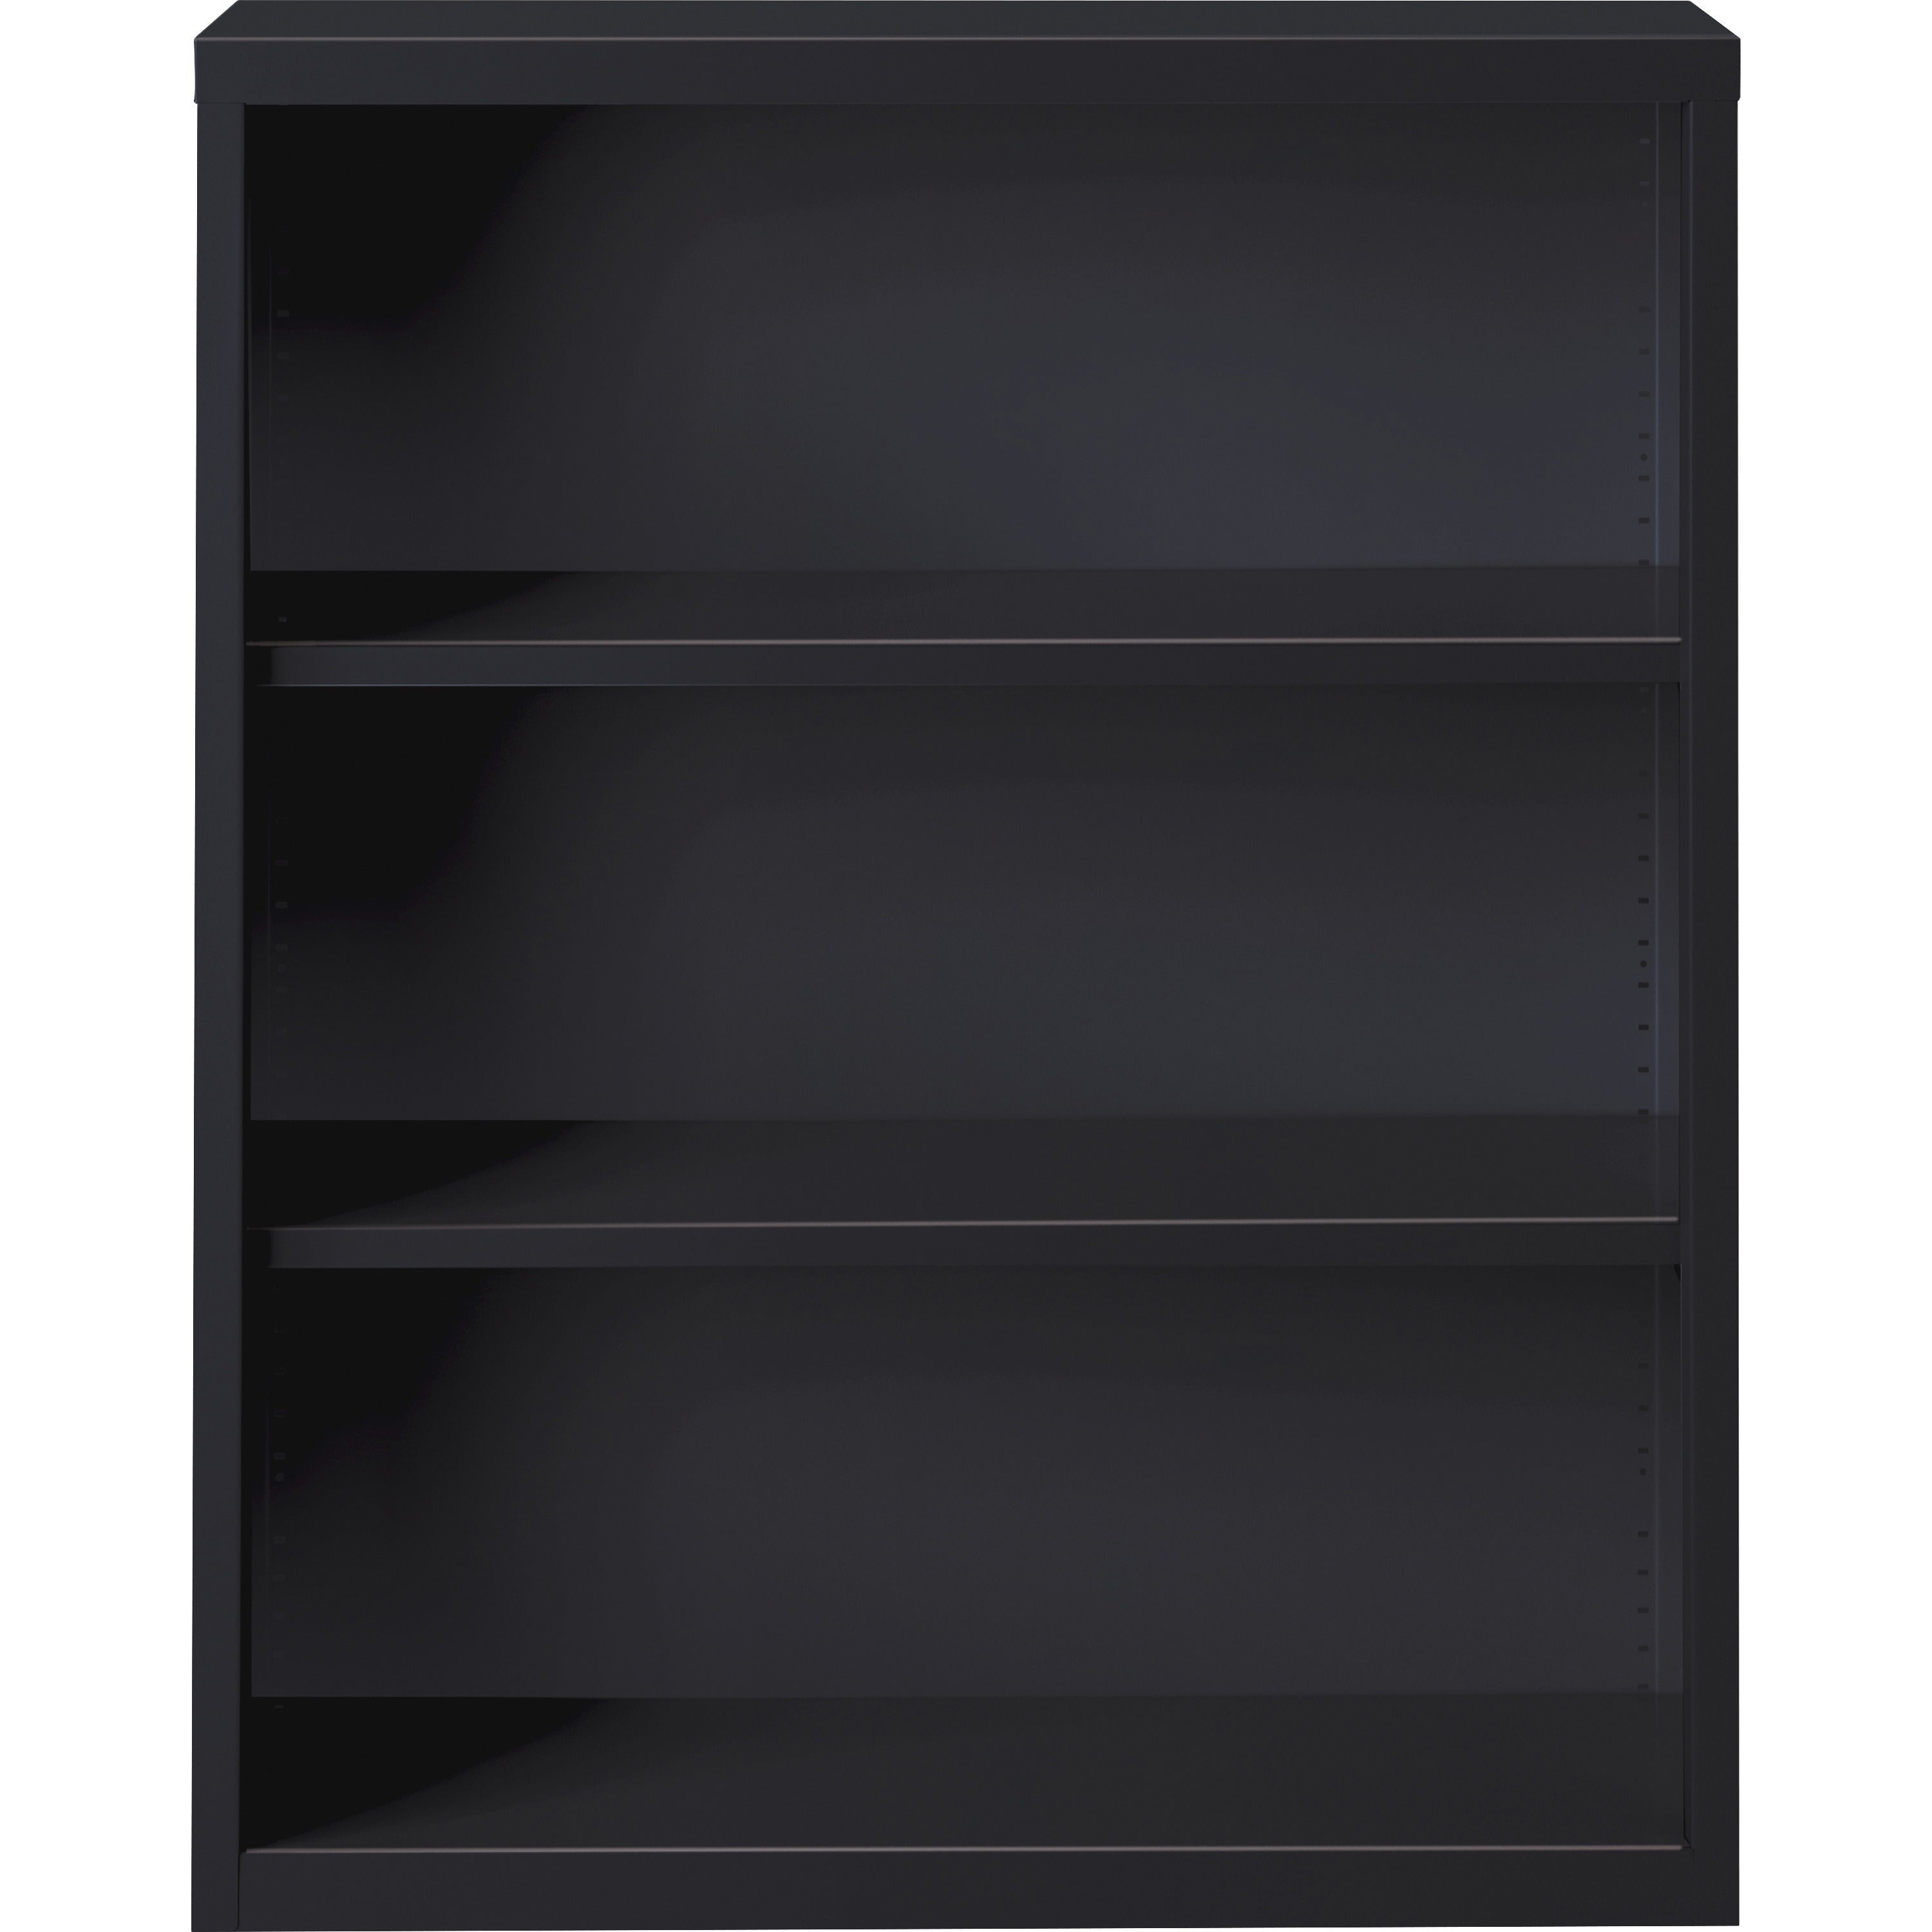 Lorell Fortress Series Bookcase - 34.5" x 13" x 42" - 3 x Shelf(ves) - Black - Powder Coated - Steel - Recycled - 